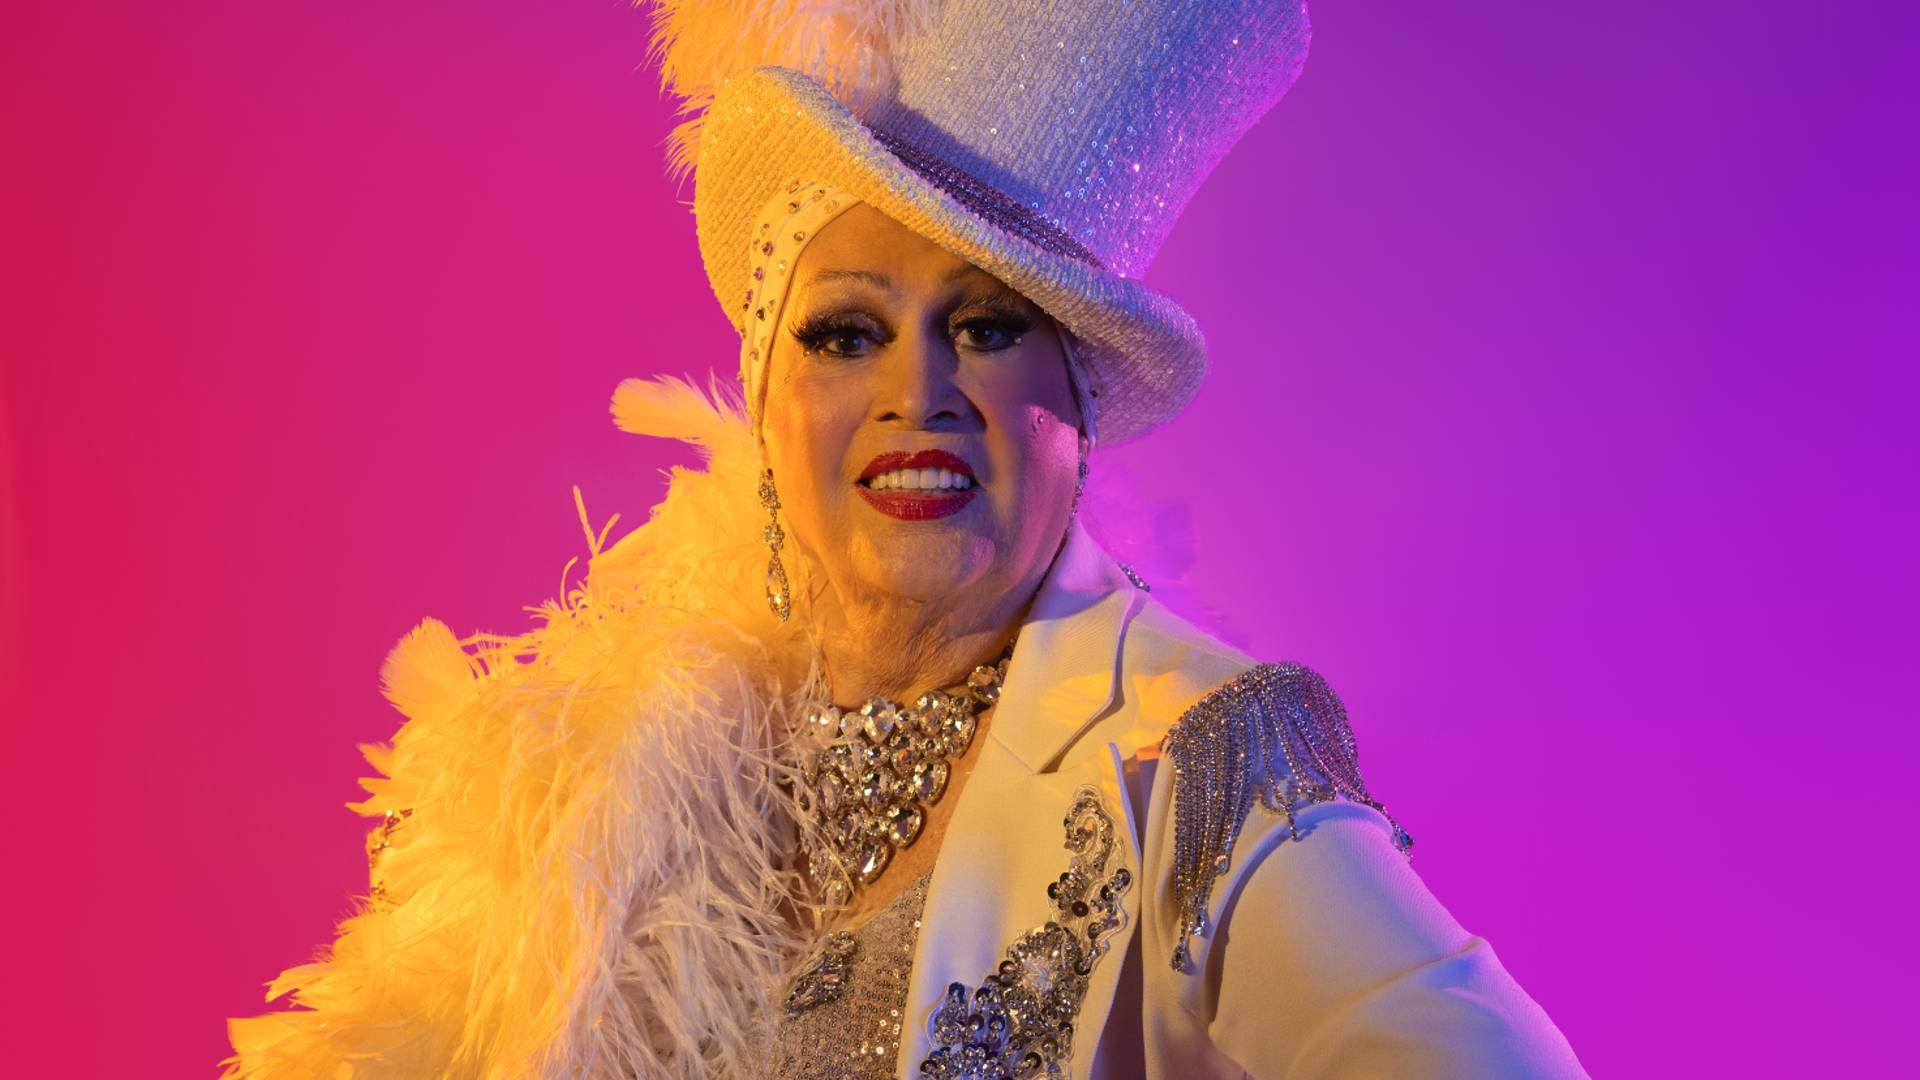 "Wear Something You're Comfortable In": Trans Icon Carlotta Gives Her Mardi Gras Style Tips